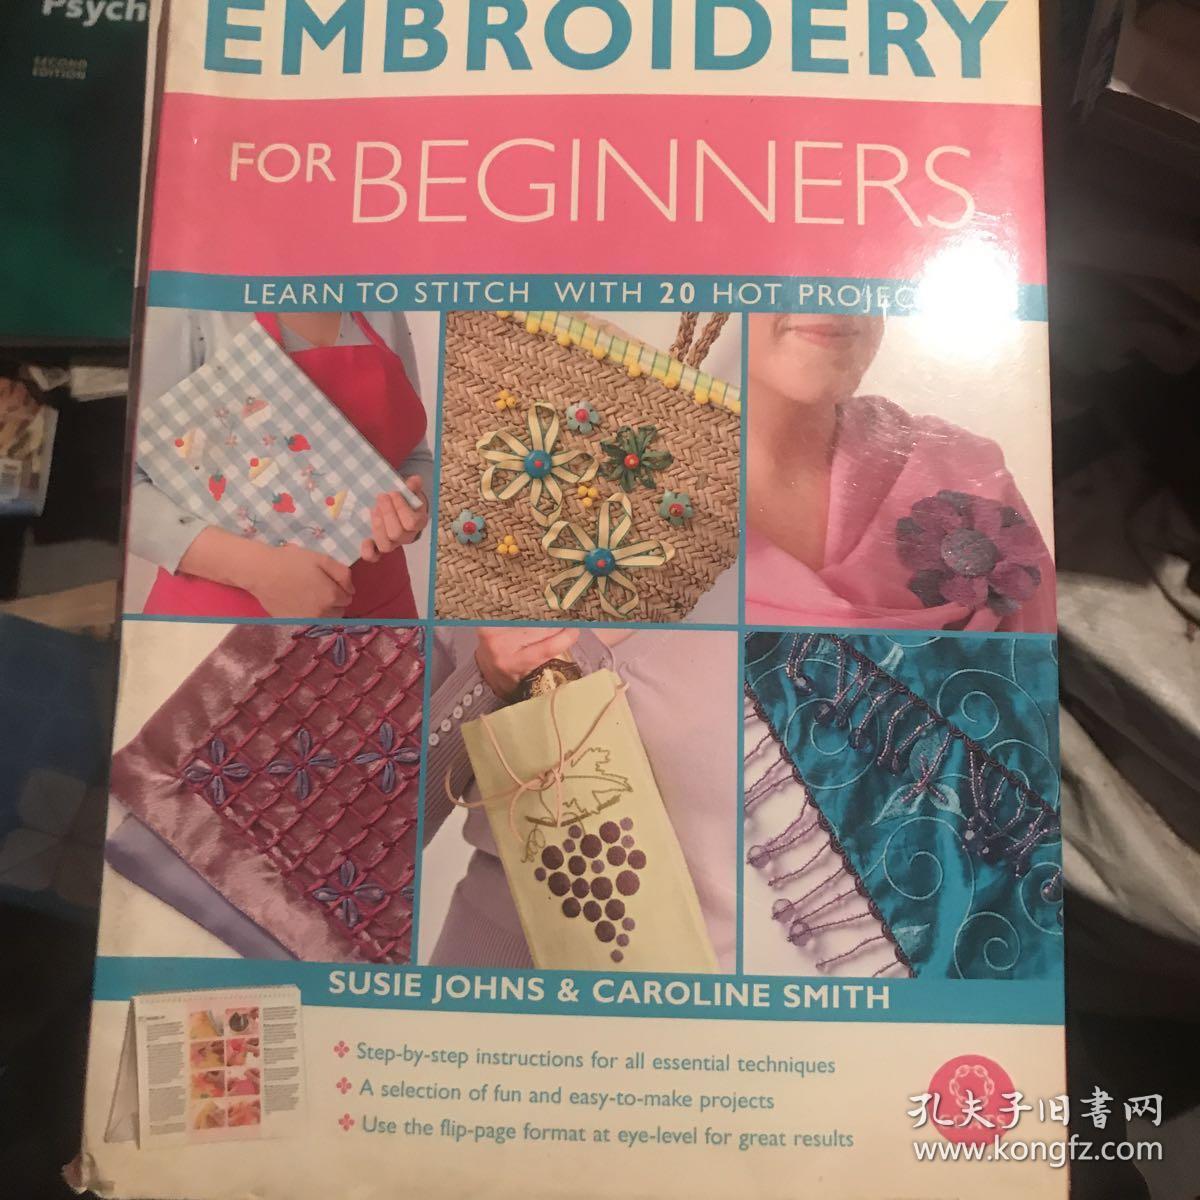 EMBROIDERY FOR BEGINNERS